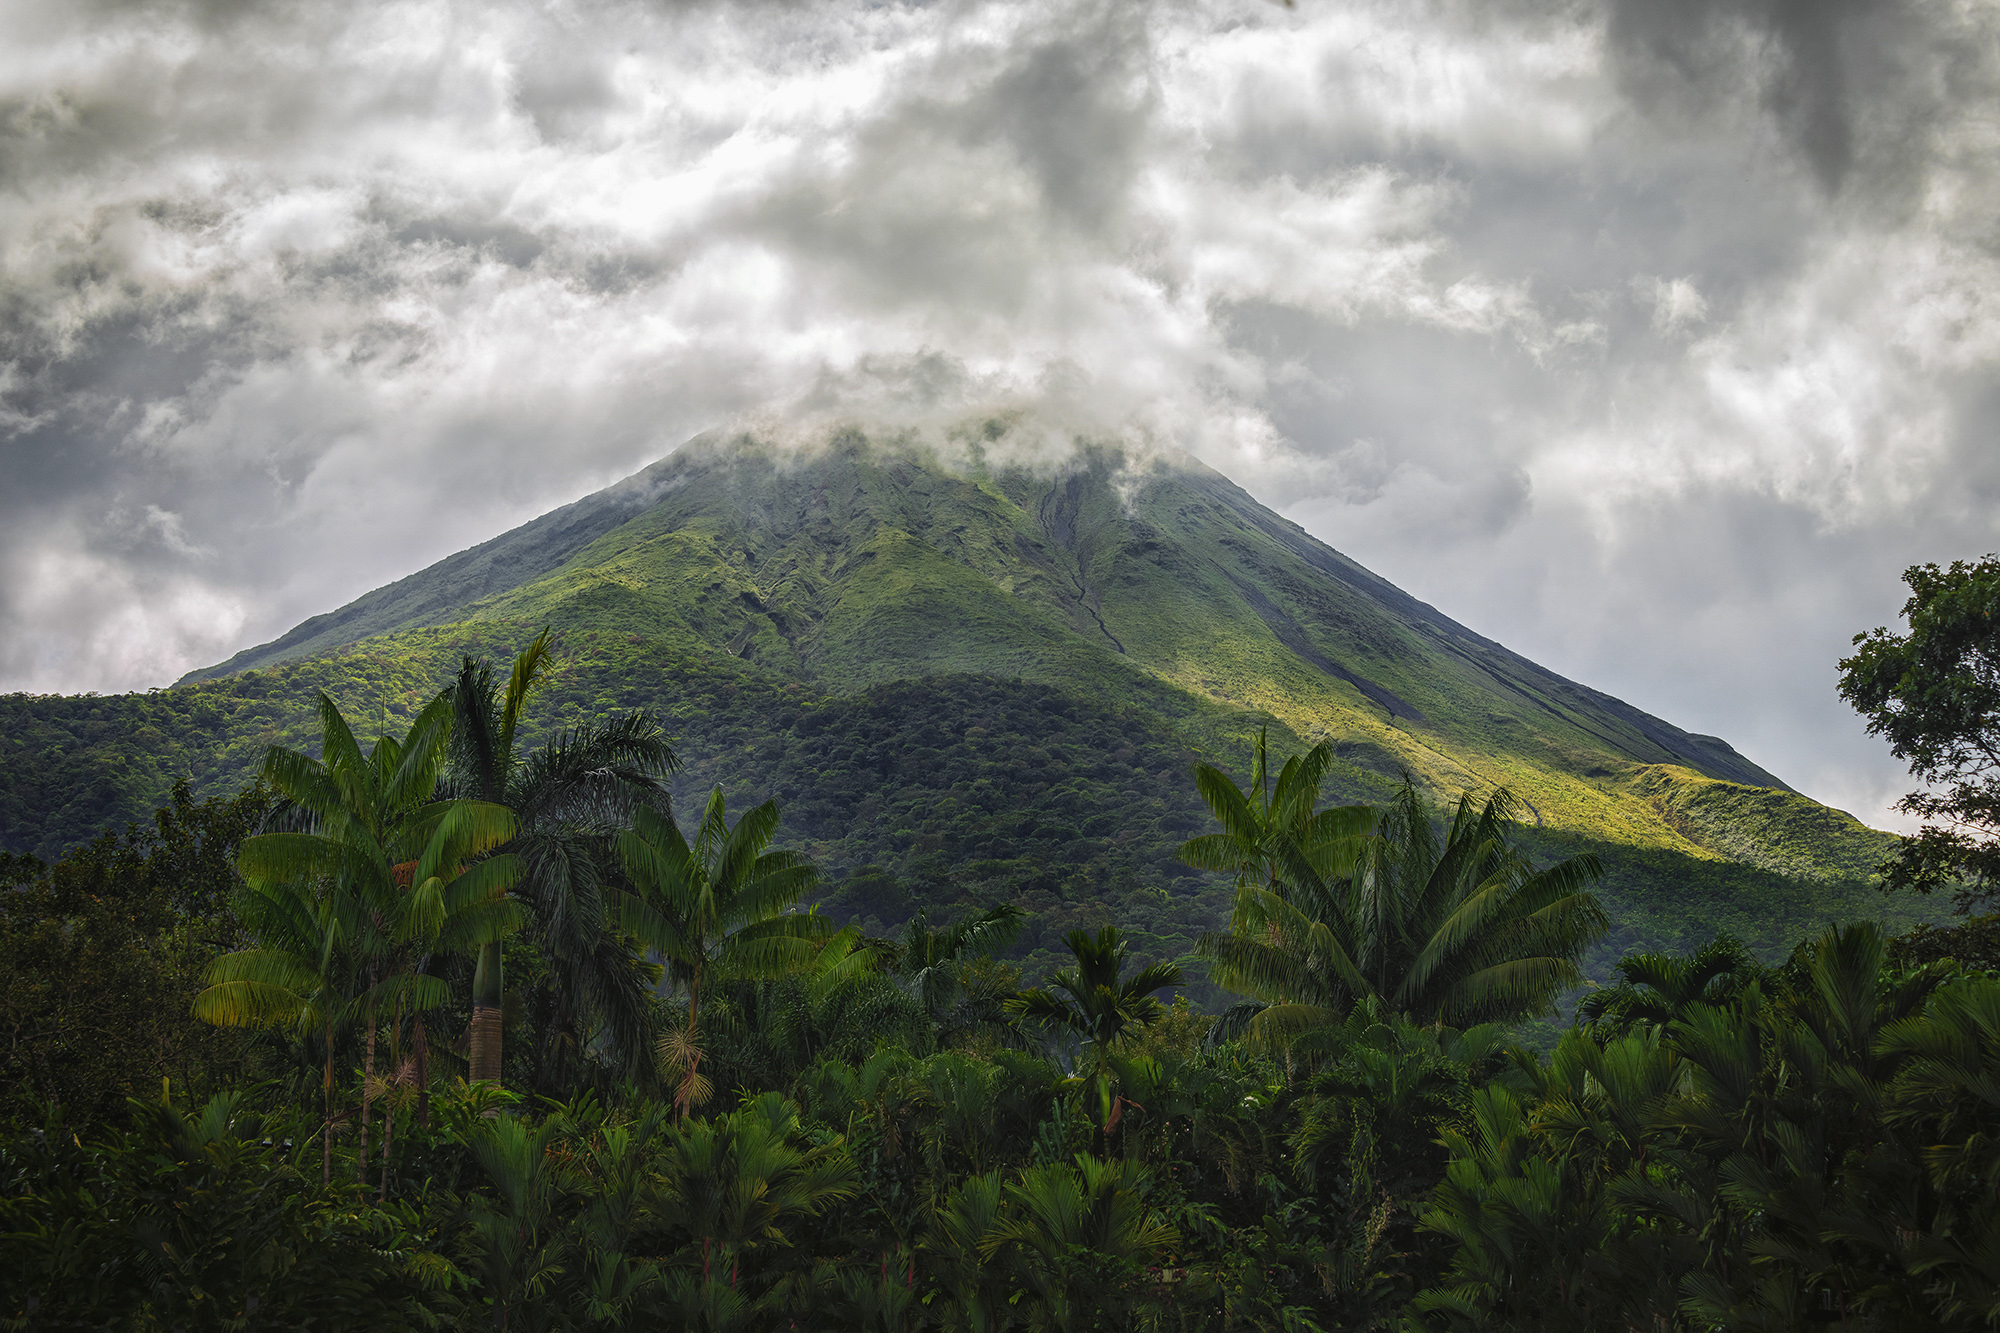 Frances Cordero de Bolaños, Costa Rica, Volcan Arenal, from the series Spirit of the Natural Worlds, Beauty, and Complexities, 2022–23. Courtesy of the artist